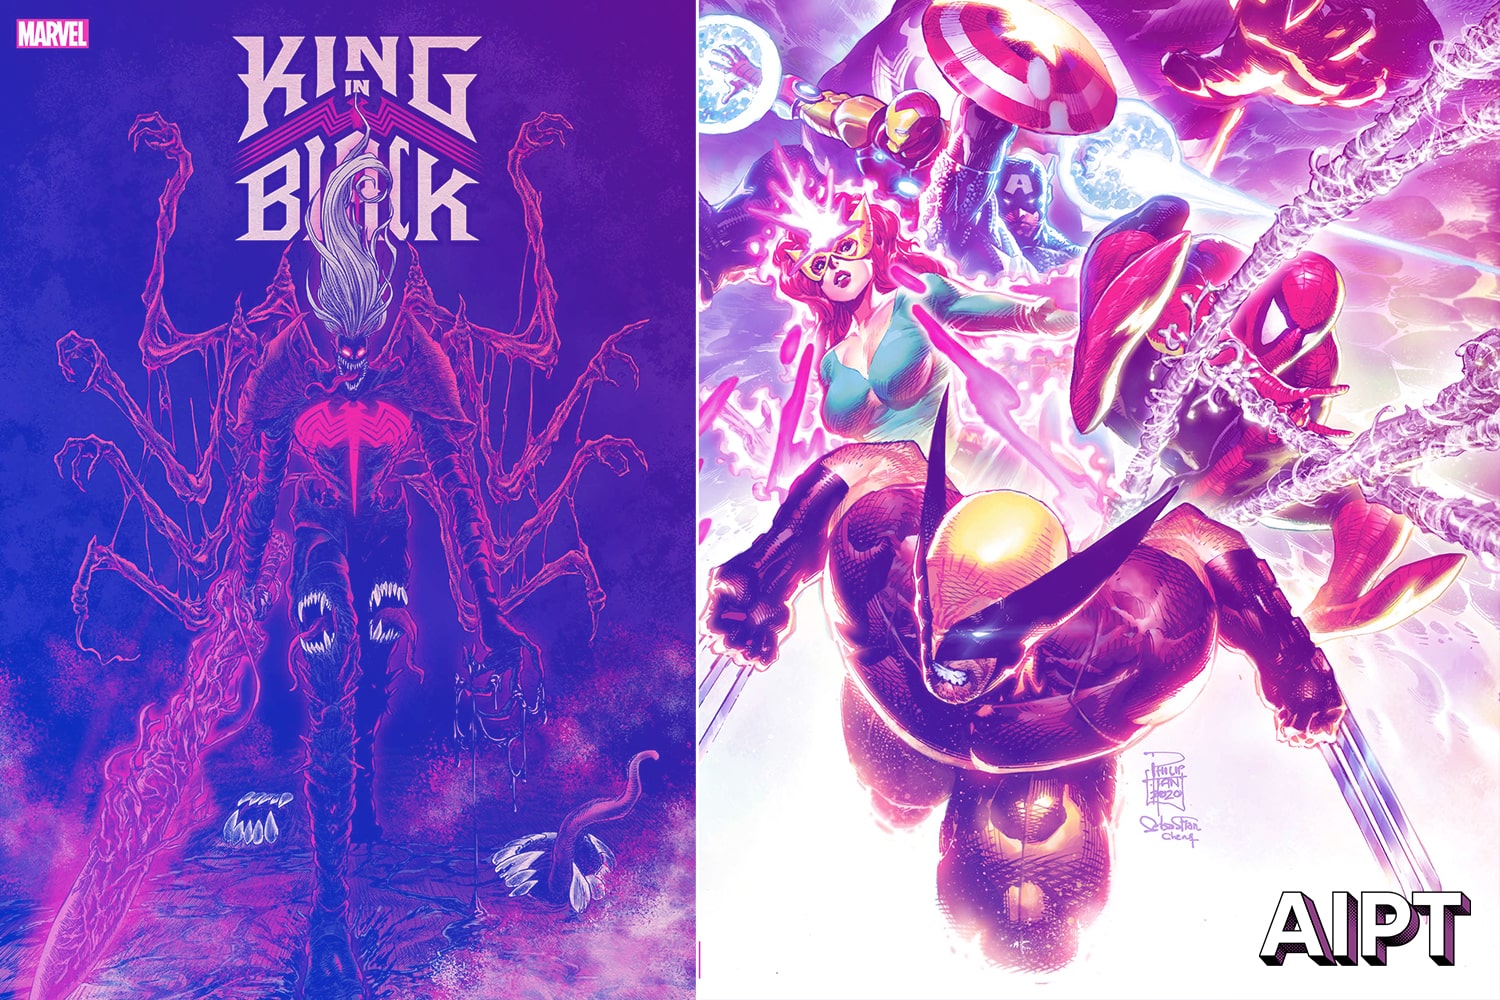 Marvel Comics reveals 'King in Black' #1 variant covers